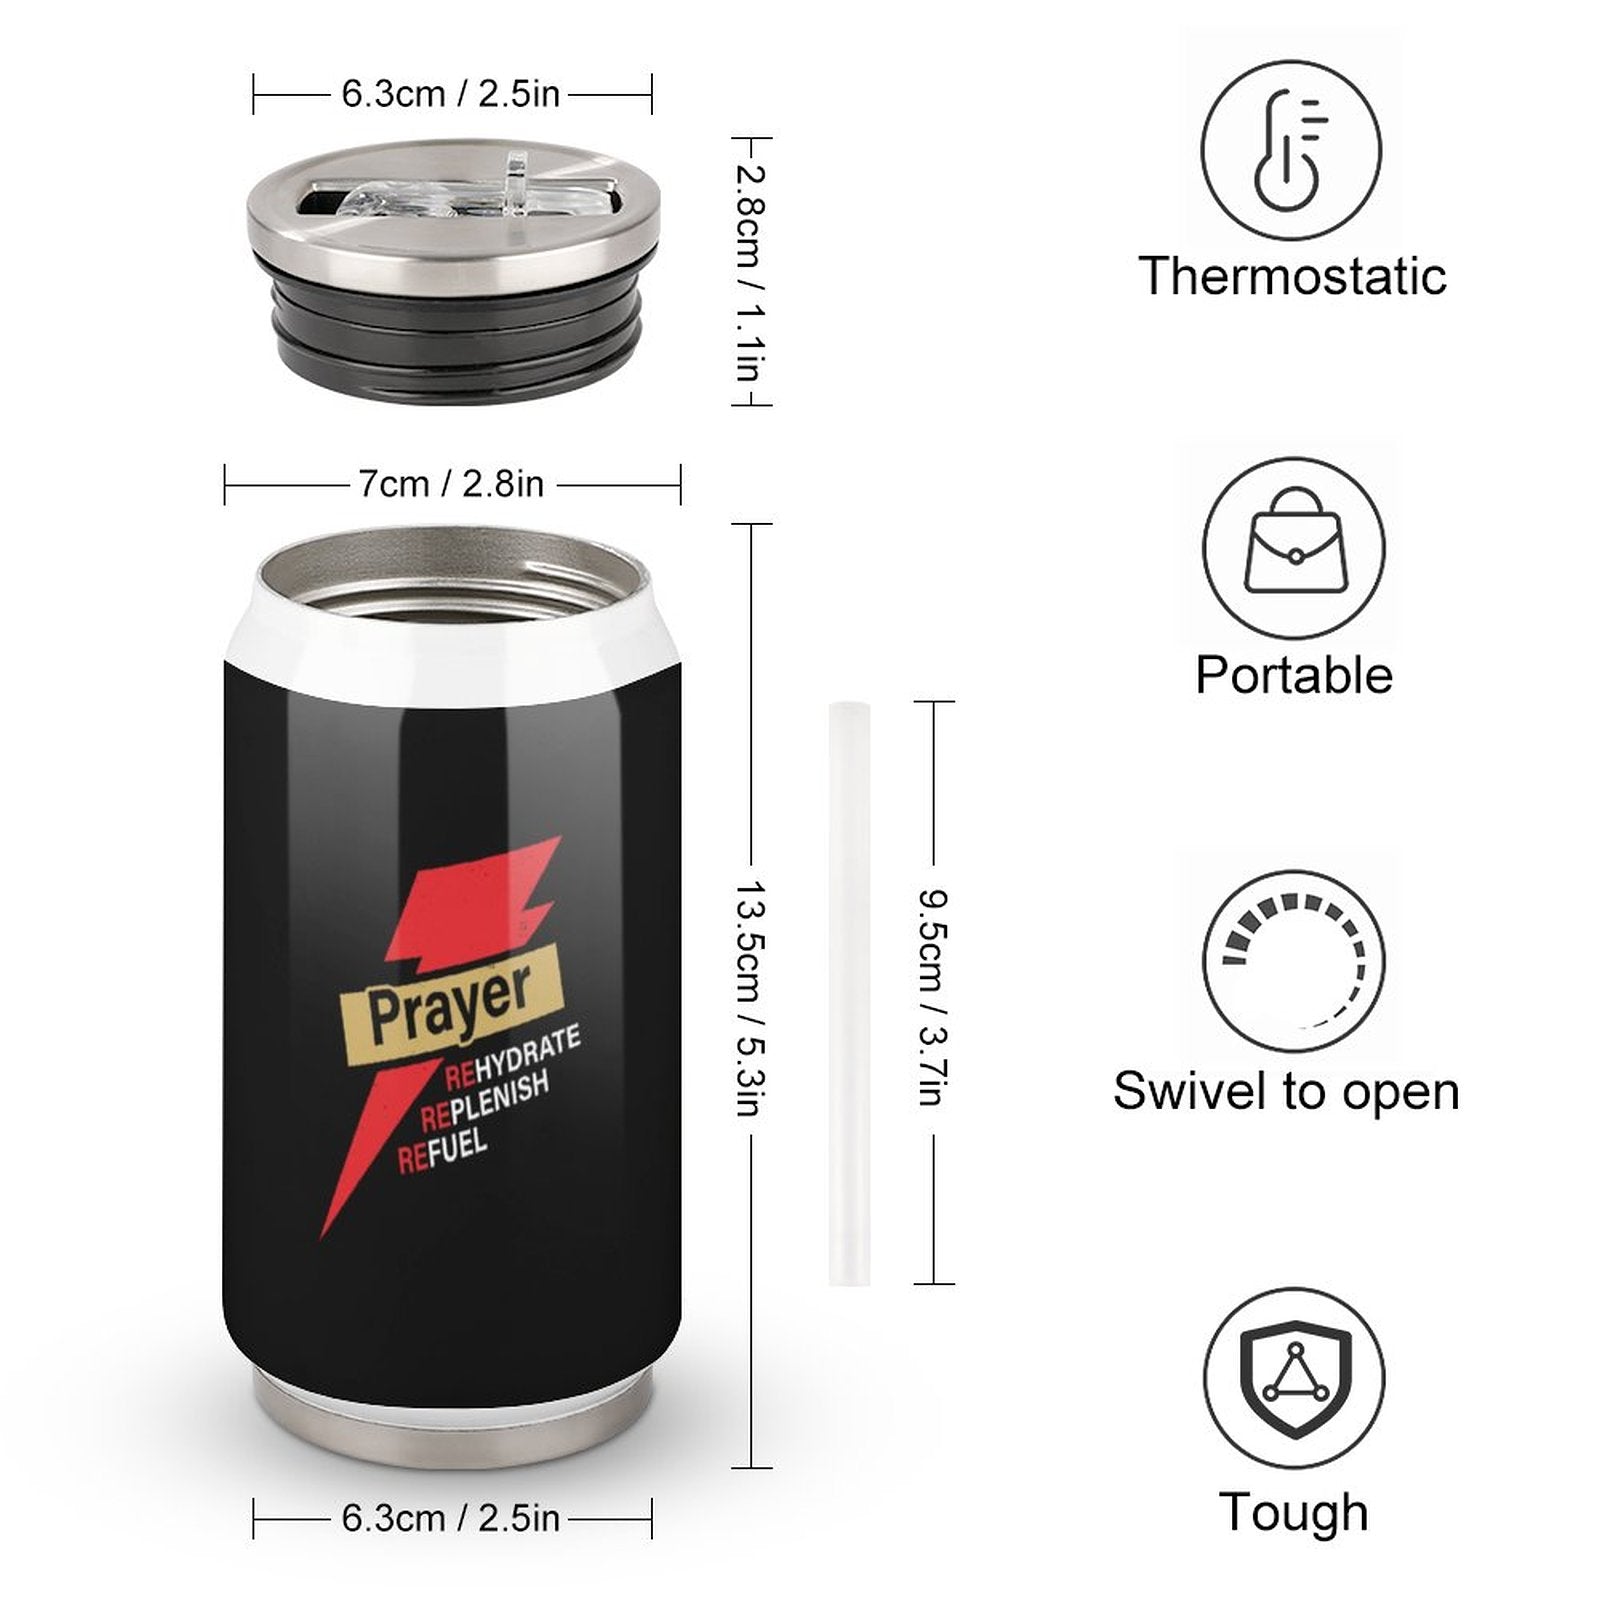 Prayer Rehydrate Replenish Refuel Christian Stainless Steel Tumbler with Straw SALE-Personal Design